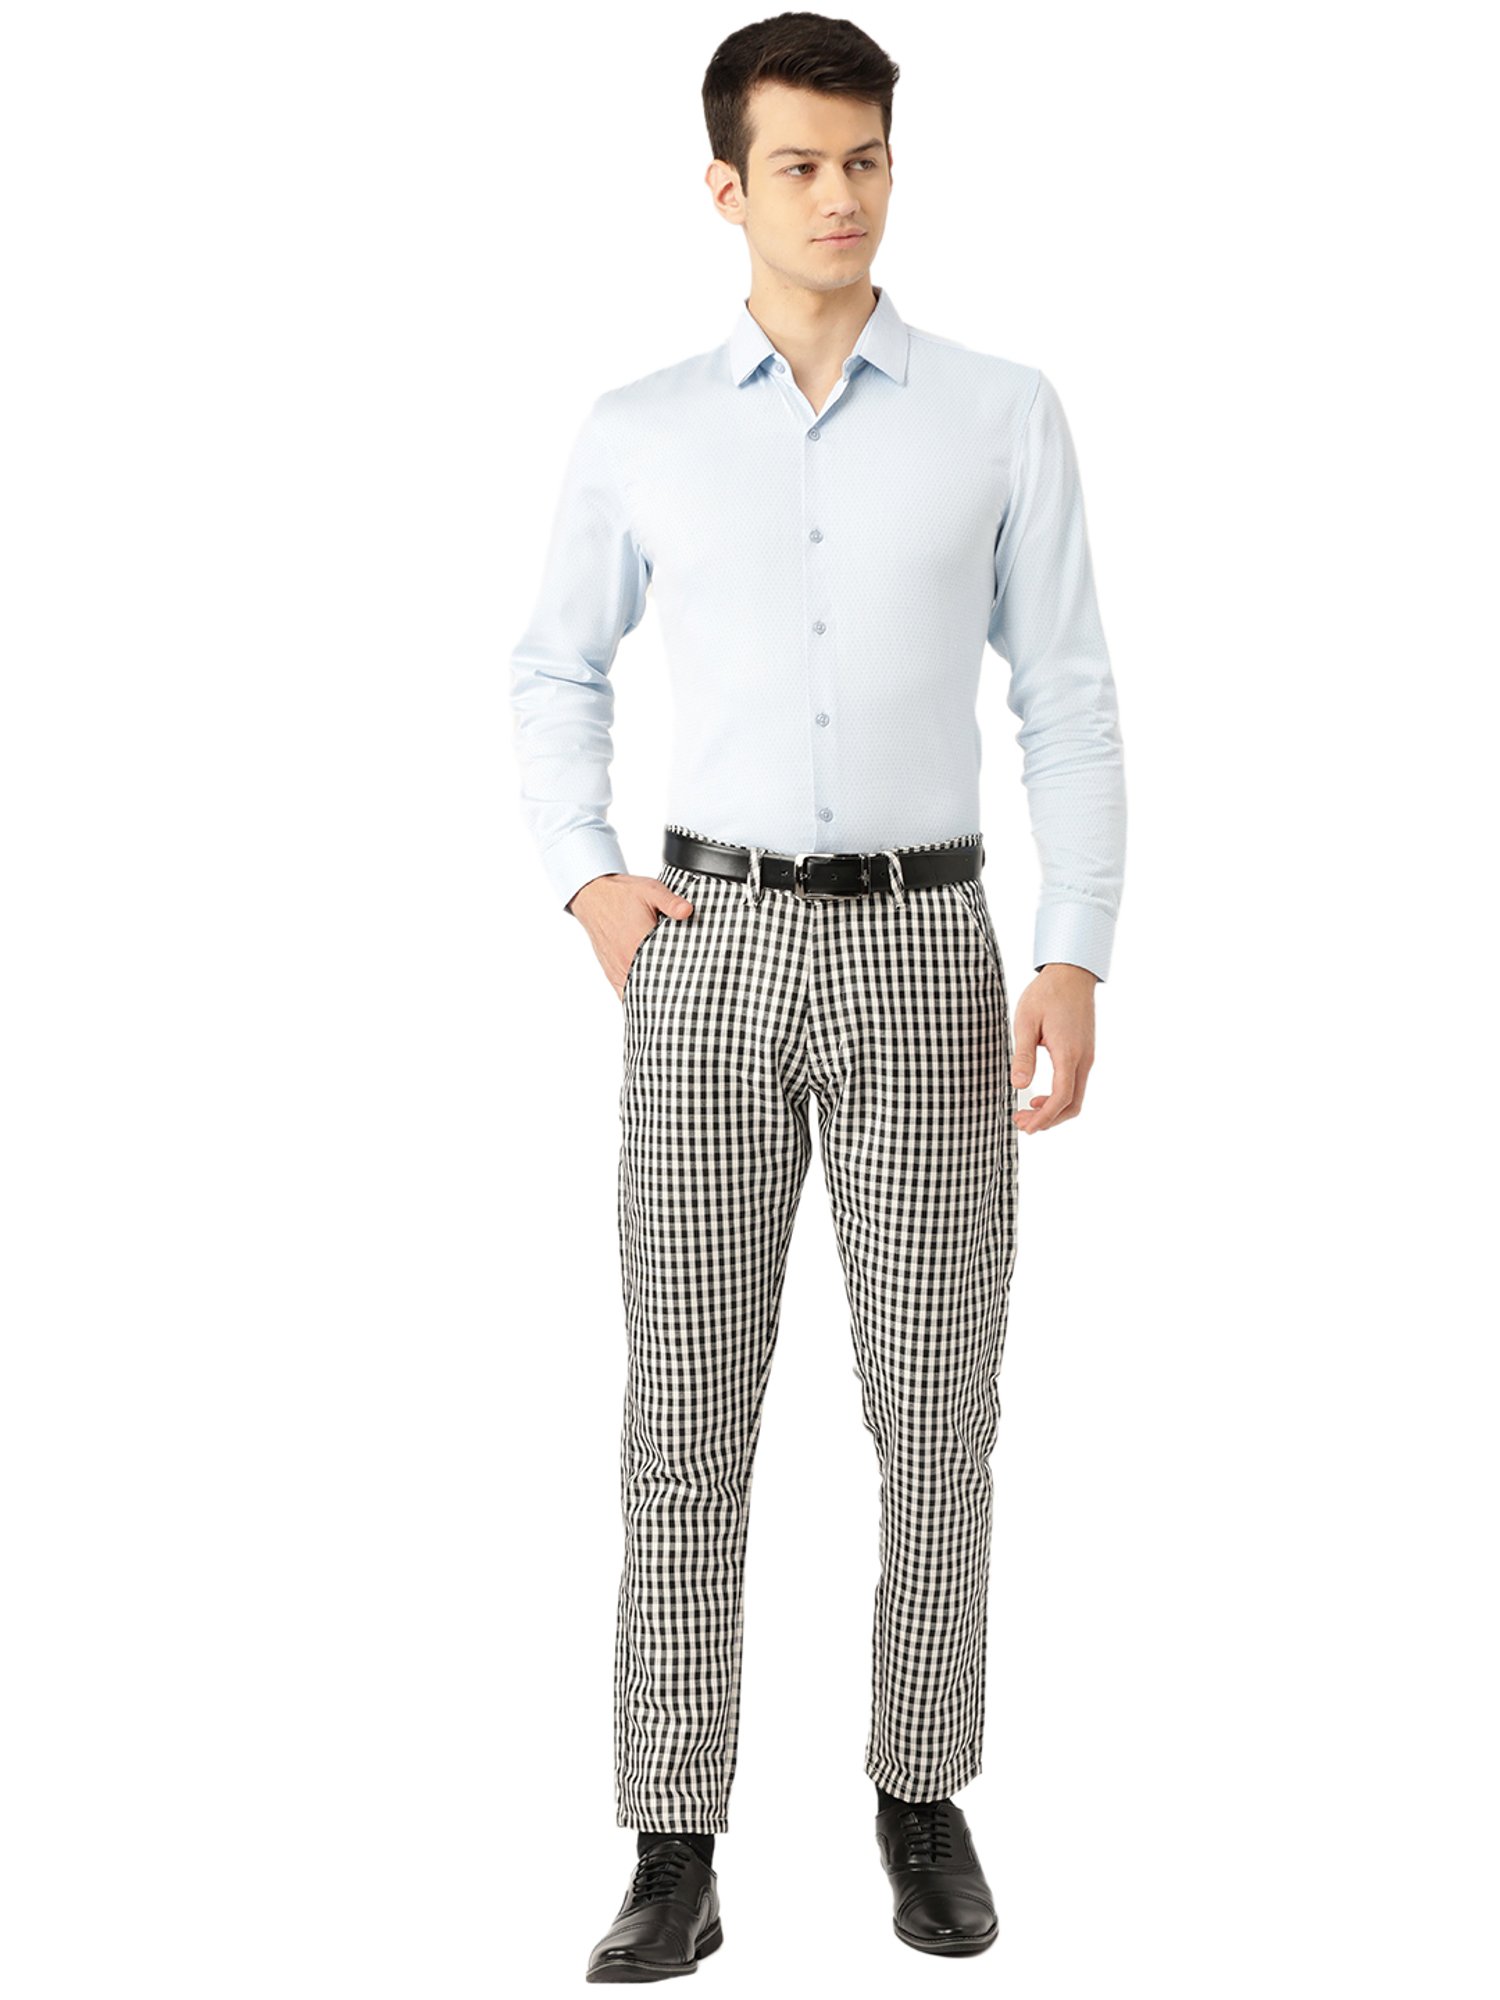 Black  White Check Trousers by Marques Almeida on Sale